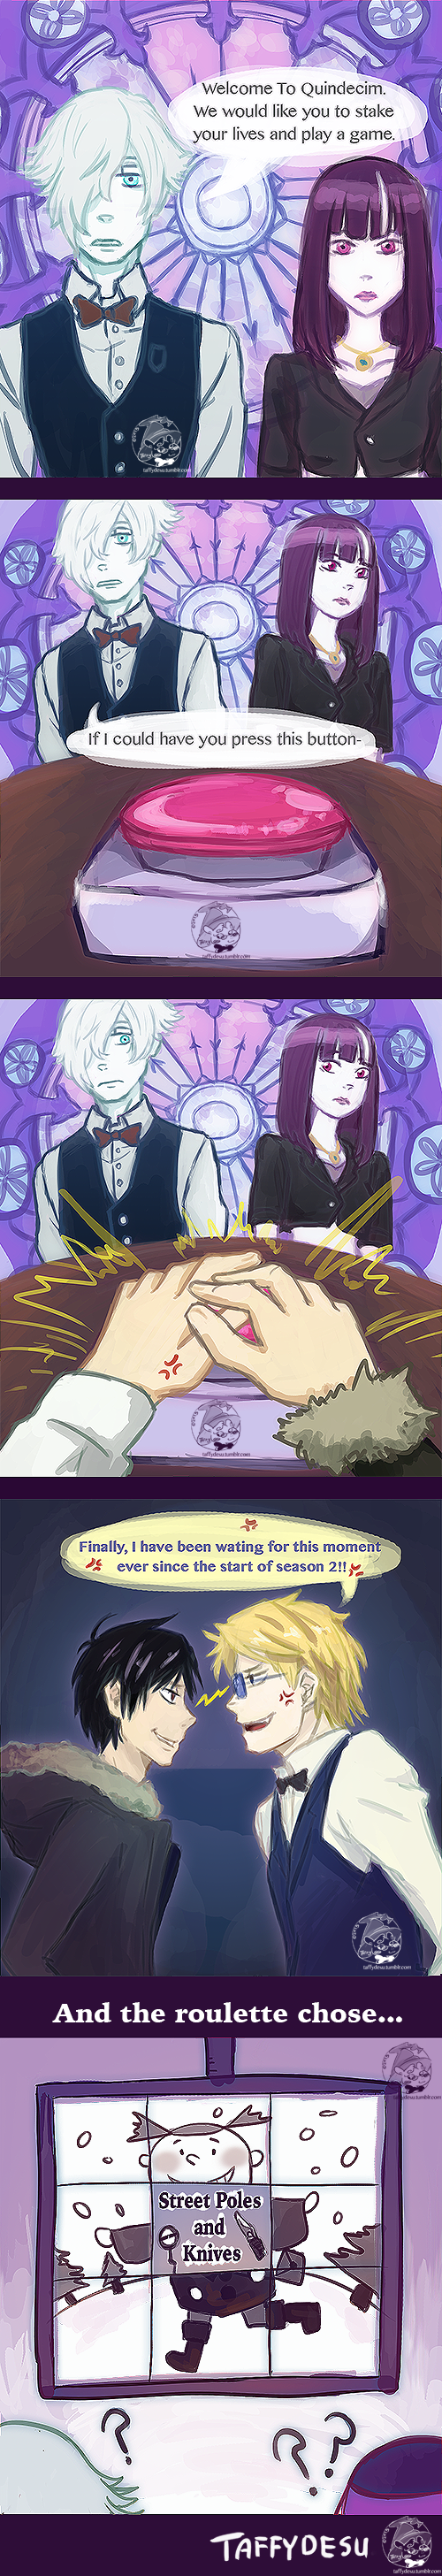 Is Death Parade Season 2 Release Date Coming Soon